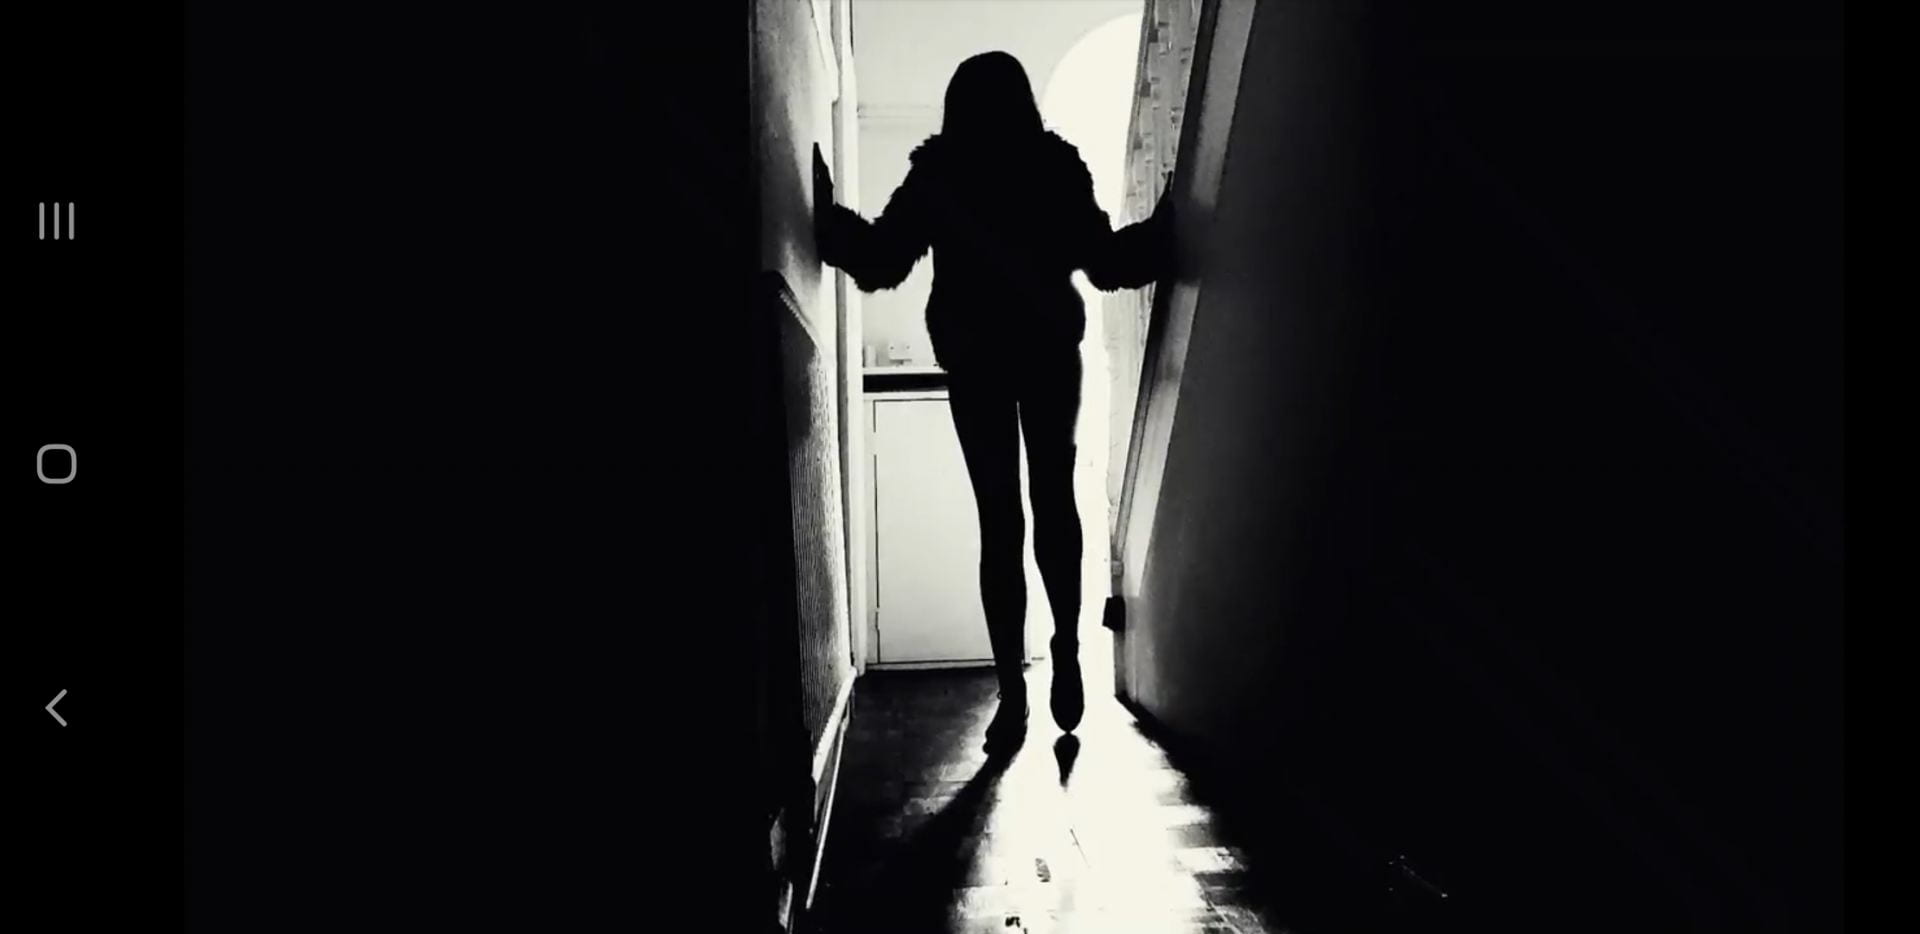 Black & white image of a person walking down a hallway. 